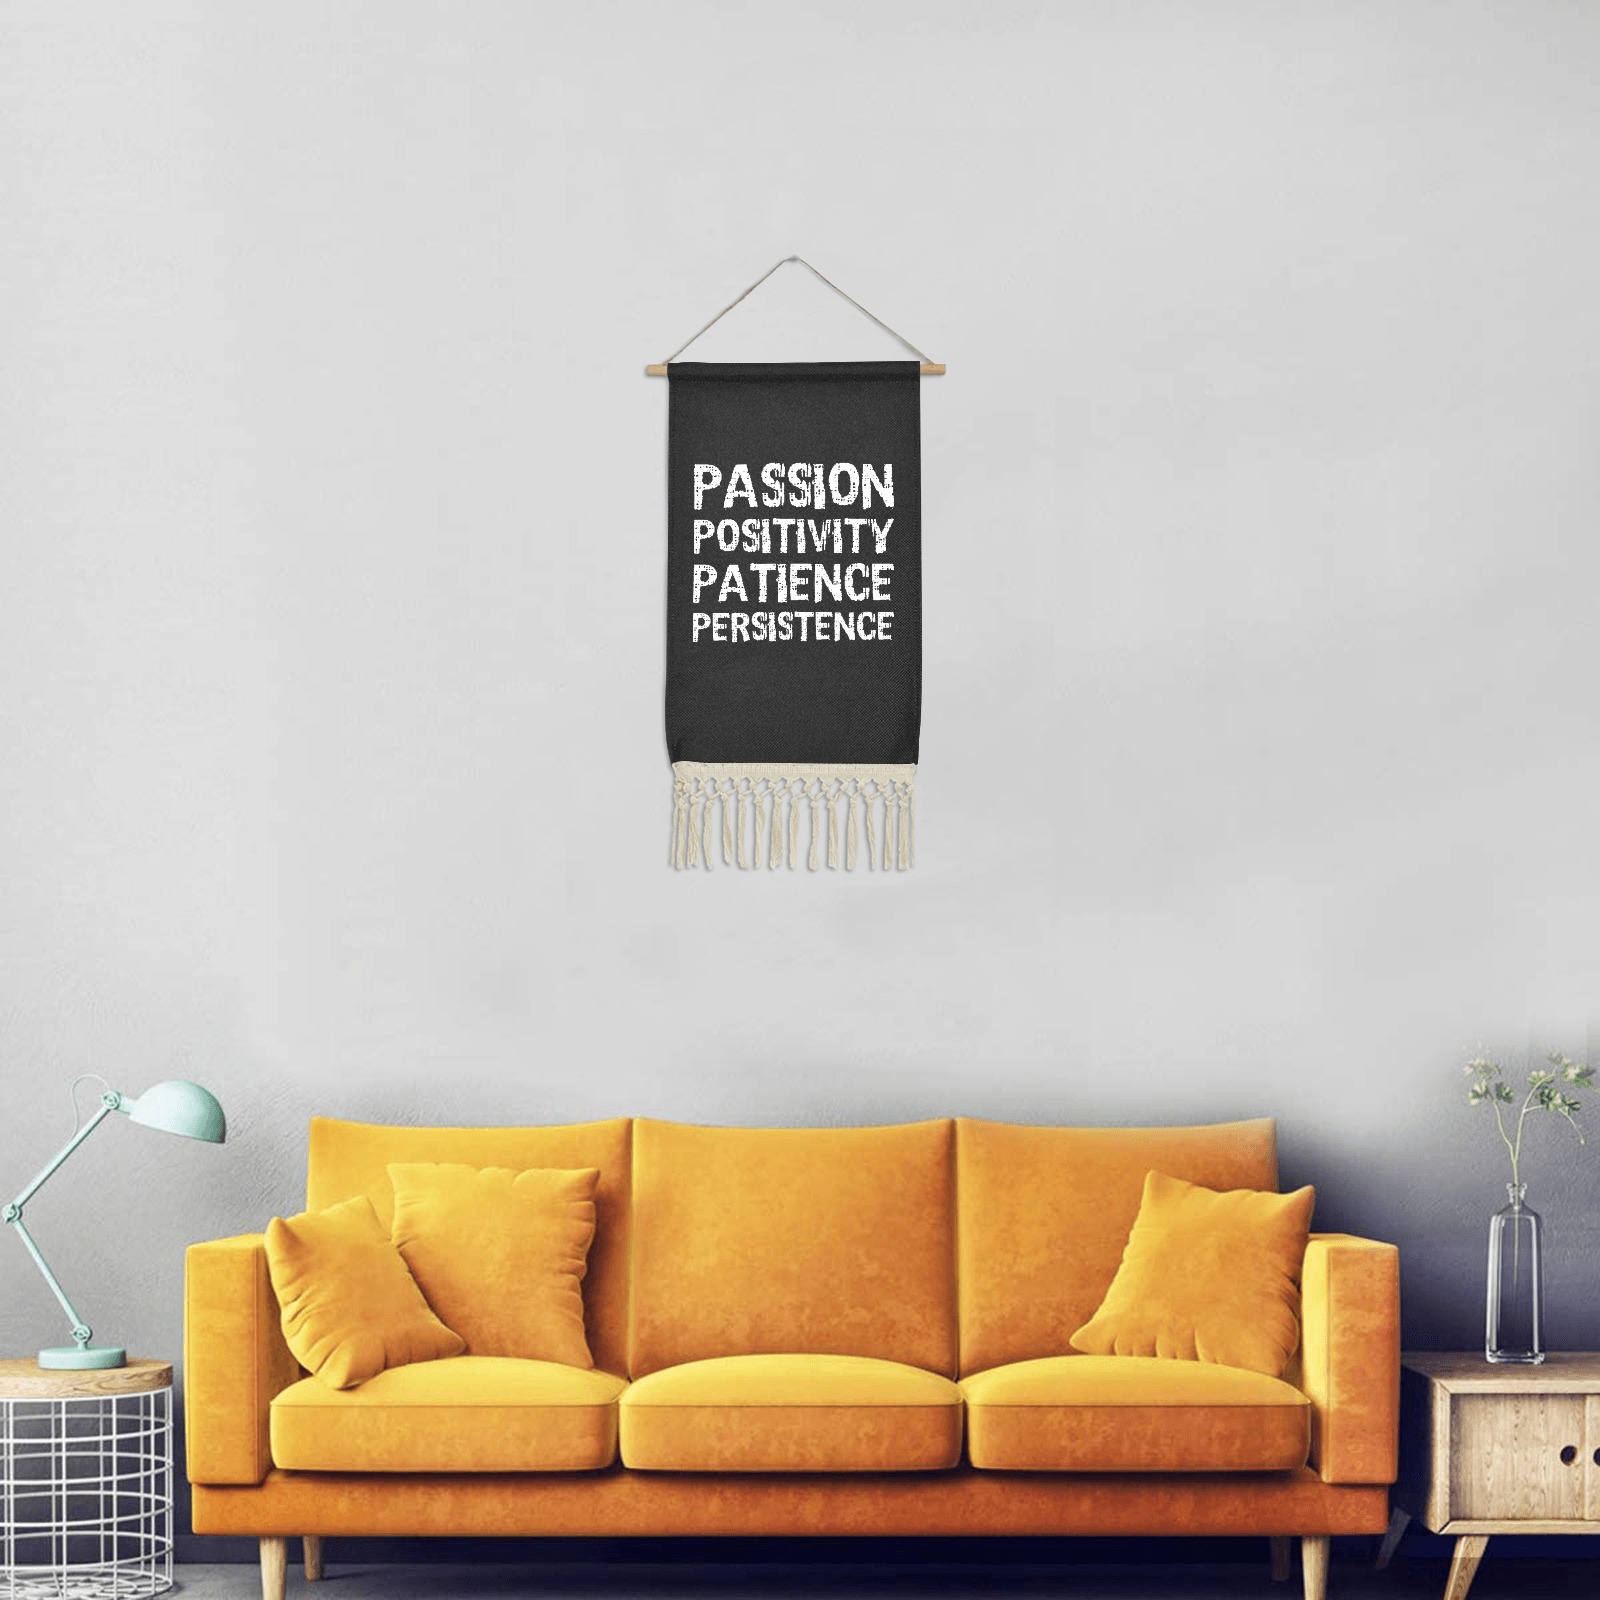 Passion, positivity, patience, persistence white Linen Hanging Poster